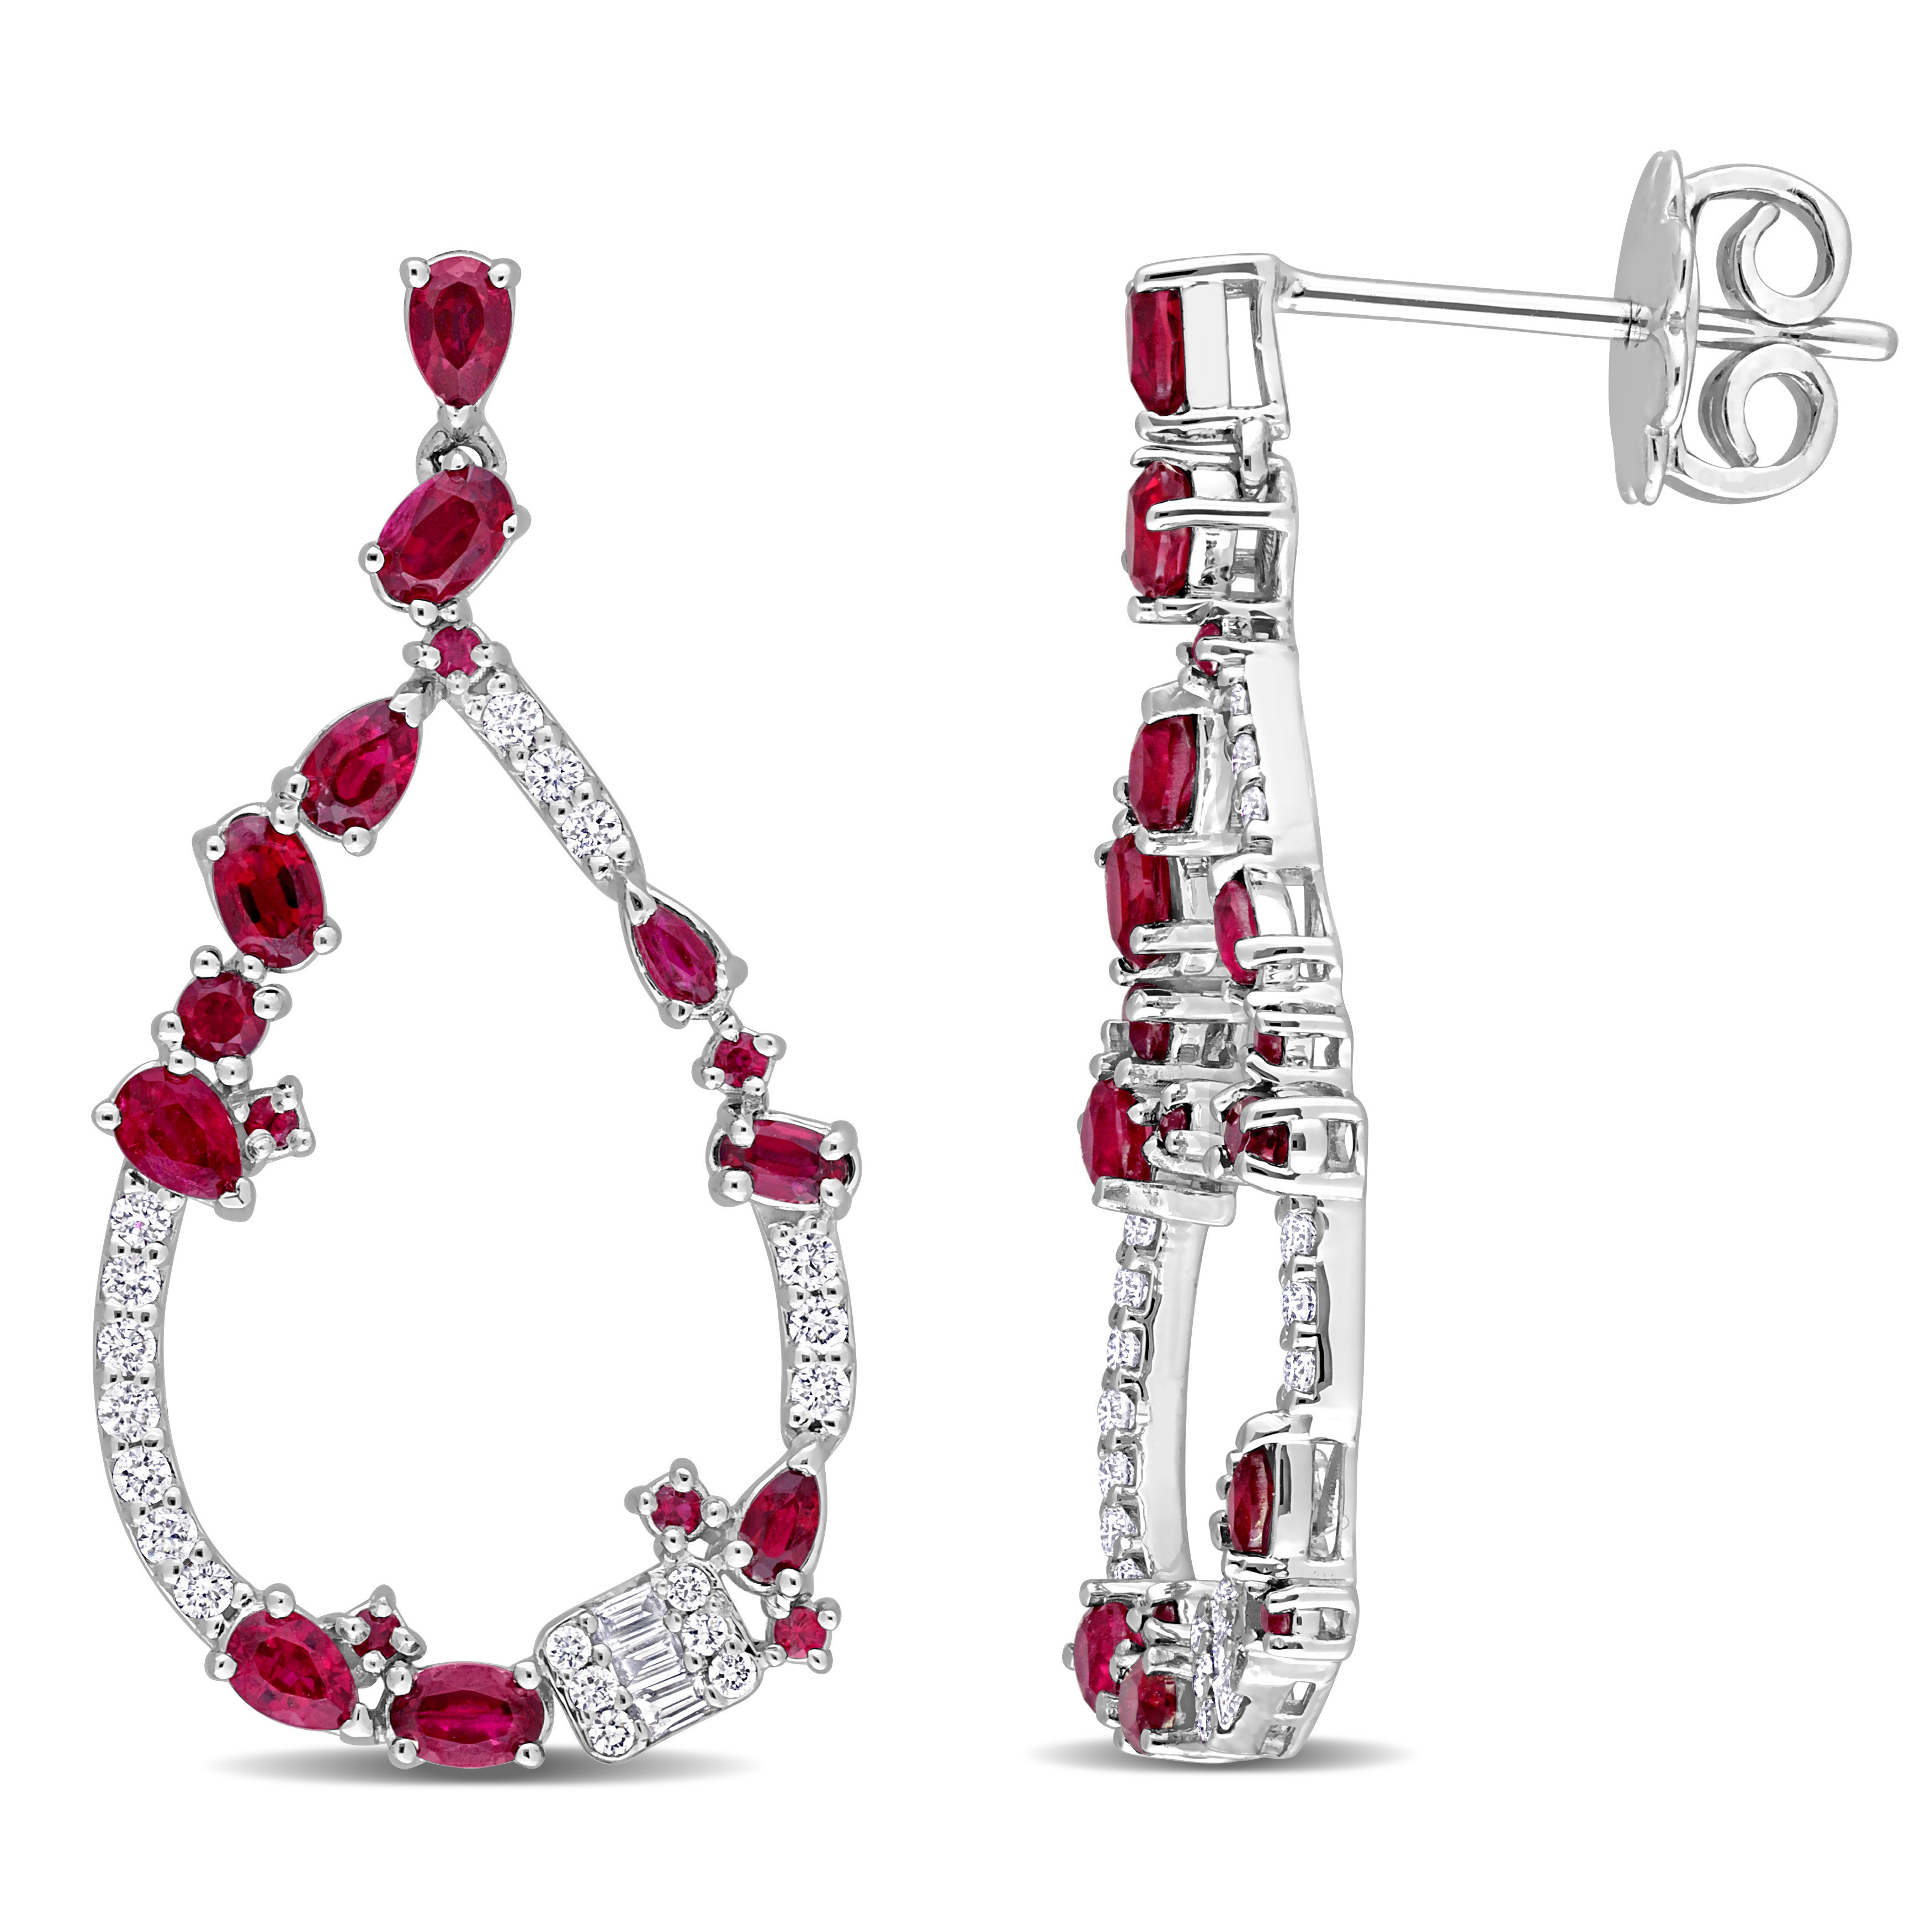 1/4 CT Round And Parallel Baguette Diamonds TW And 4 1/6 CT TGW Ruby Fashion Post Earrings in 14K White Gold